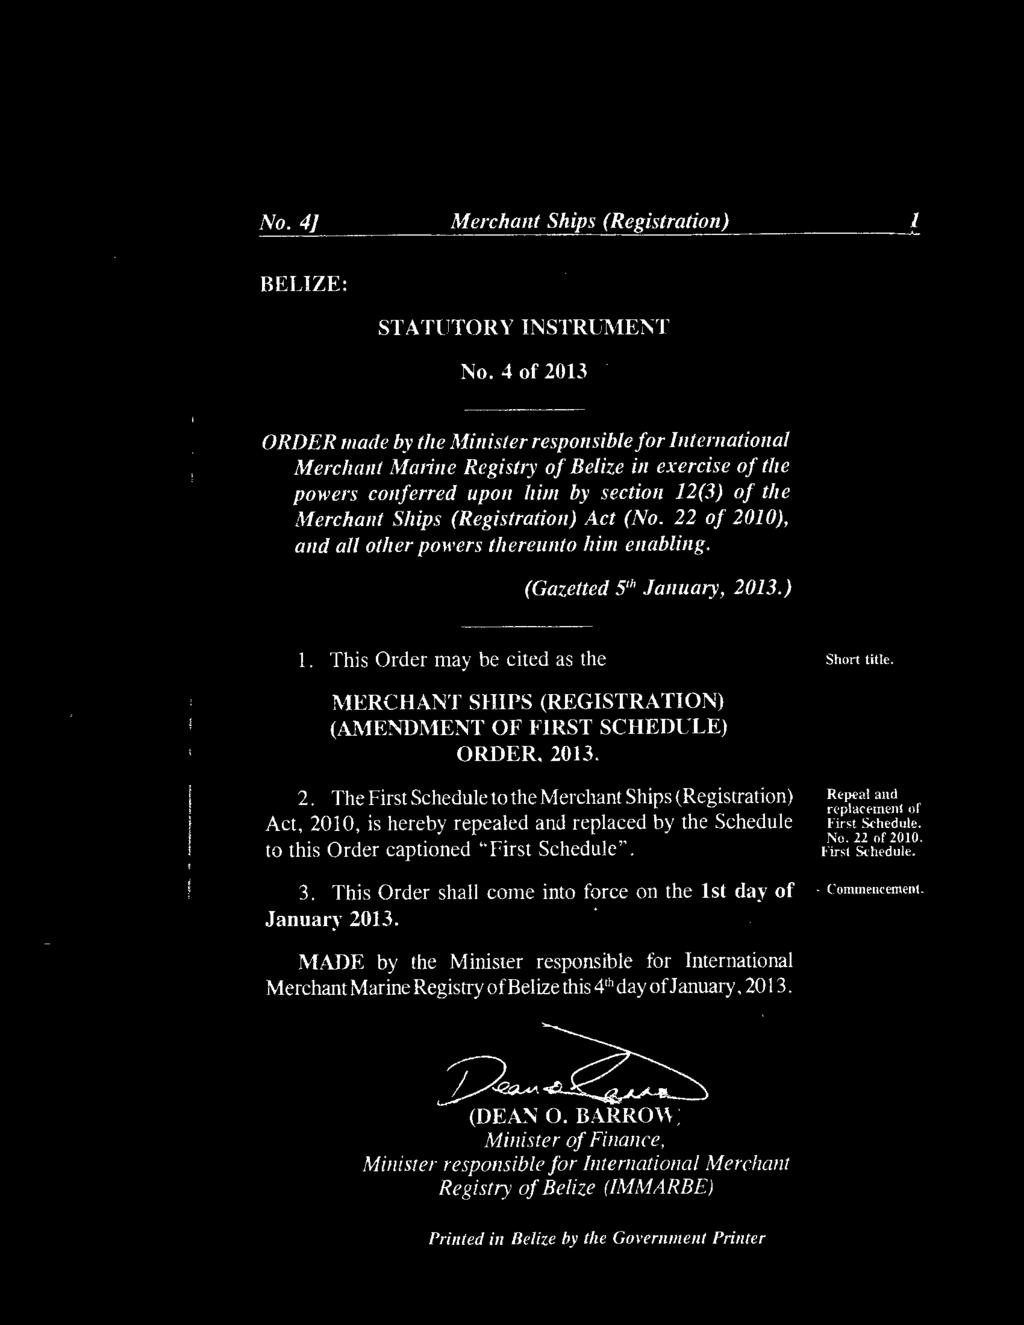 (Registration) Act (No. 22 of 2010), and all other powers thereunto him enabling. (Gazetted S'h January, 2013.) 1. This Order may be cited as the Short title.